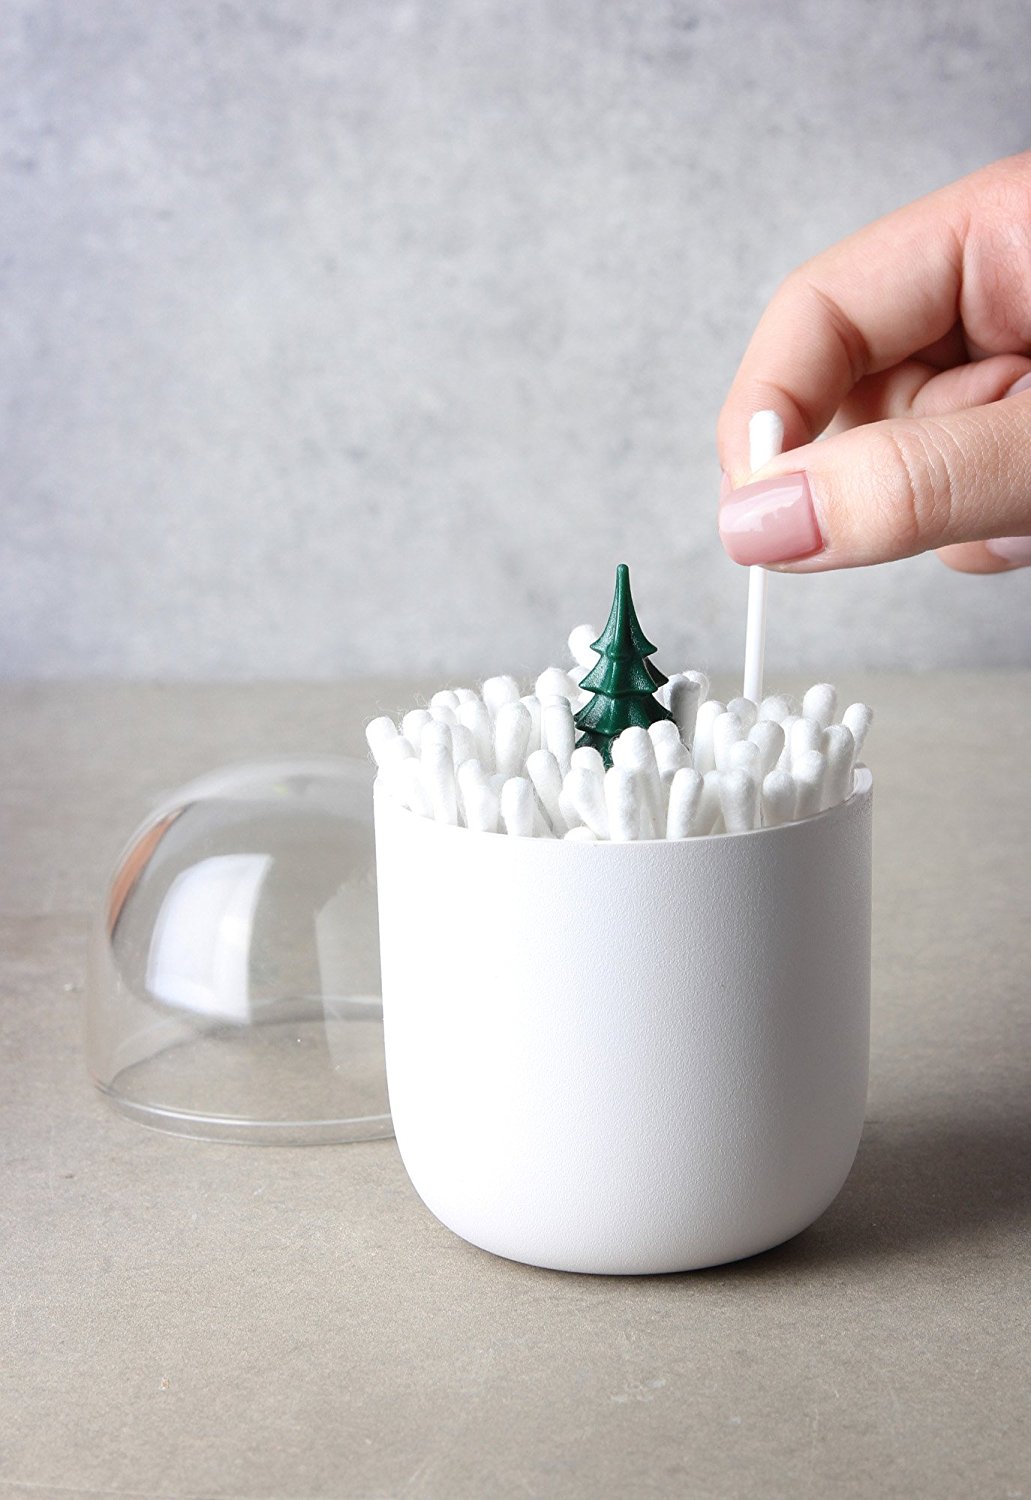 Winter Time Cotton Bud Holder by Qualy Design Studio